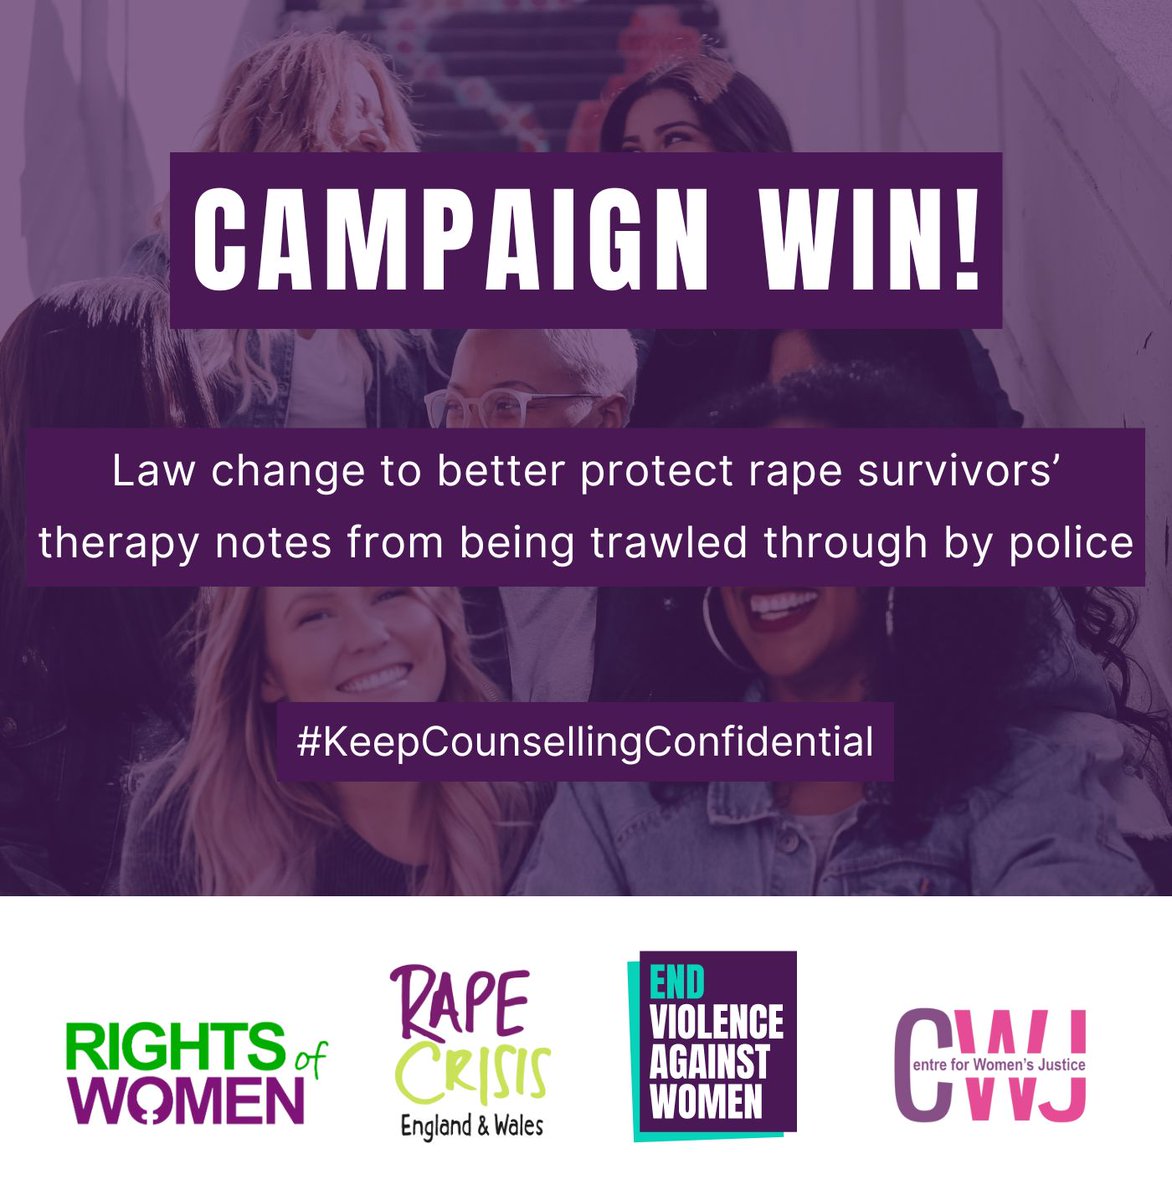 Great news on the success of the #KeepCousellingConfidentialCampaig The government accepted an amendment to the Victims and Prisoners Bill, which will raise the legal threshold for when rape survivors’ counselling notes can be requested by the police. buff.ly/49OpYNP